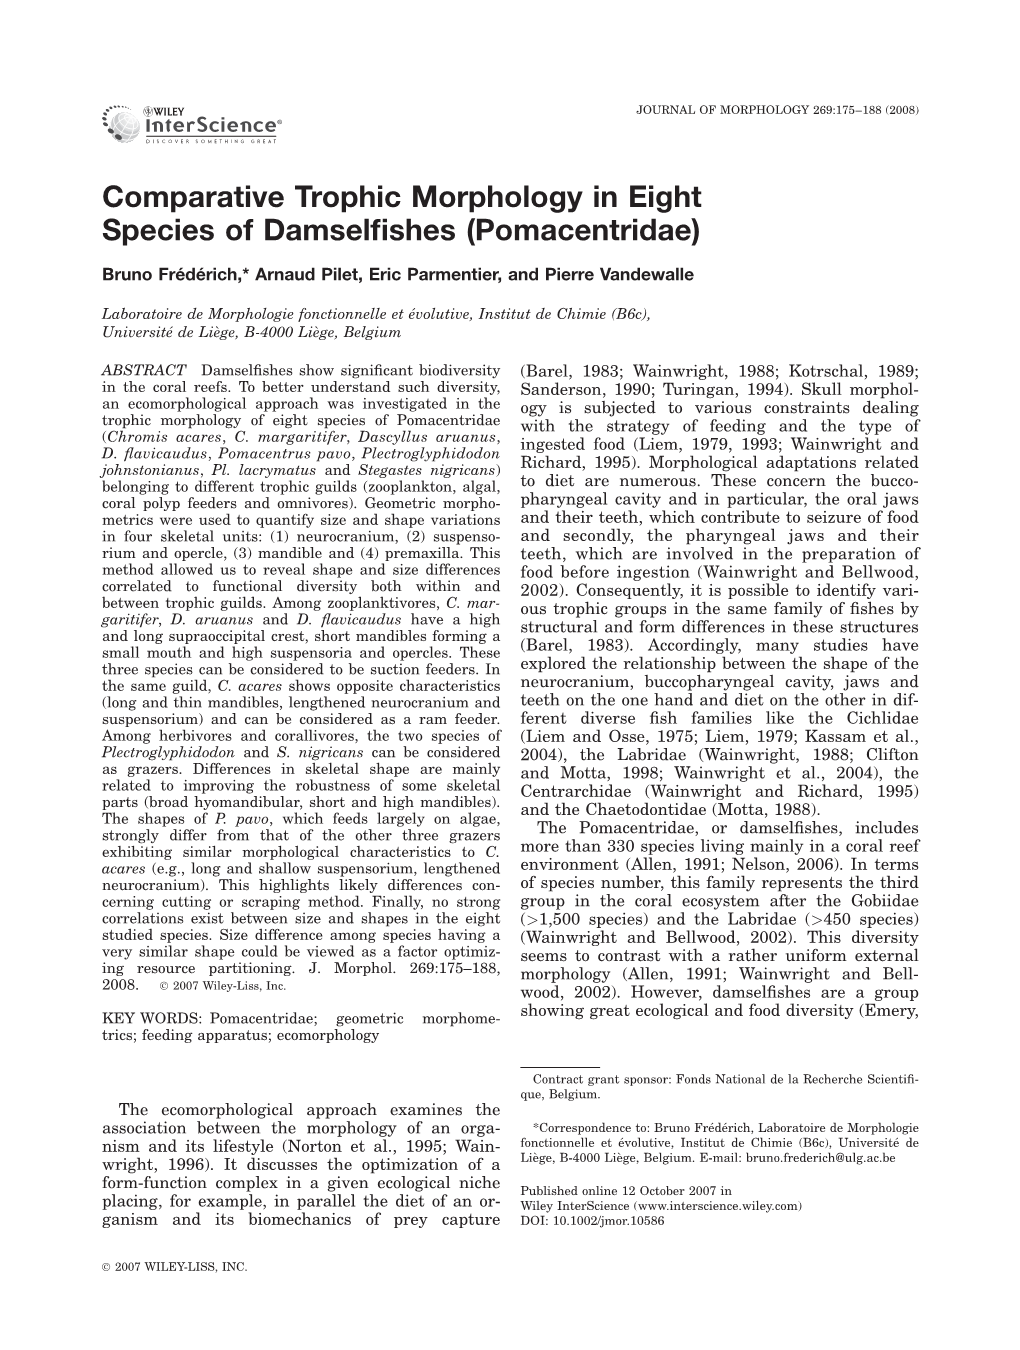 Comparative Trophic Morphology in Eight Species of Damselfishes